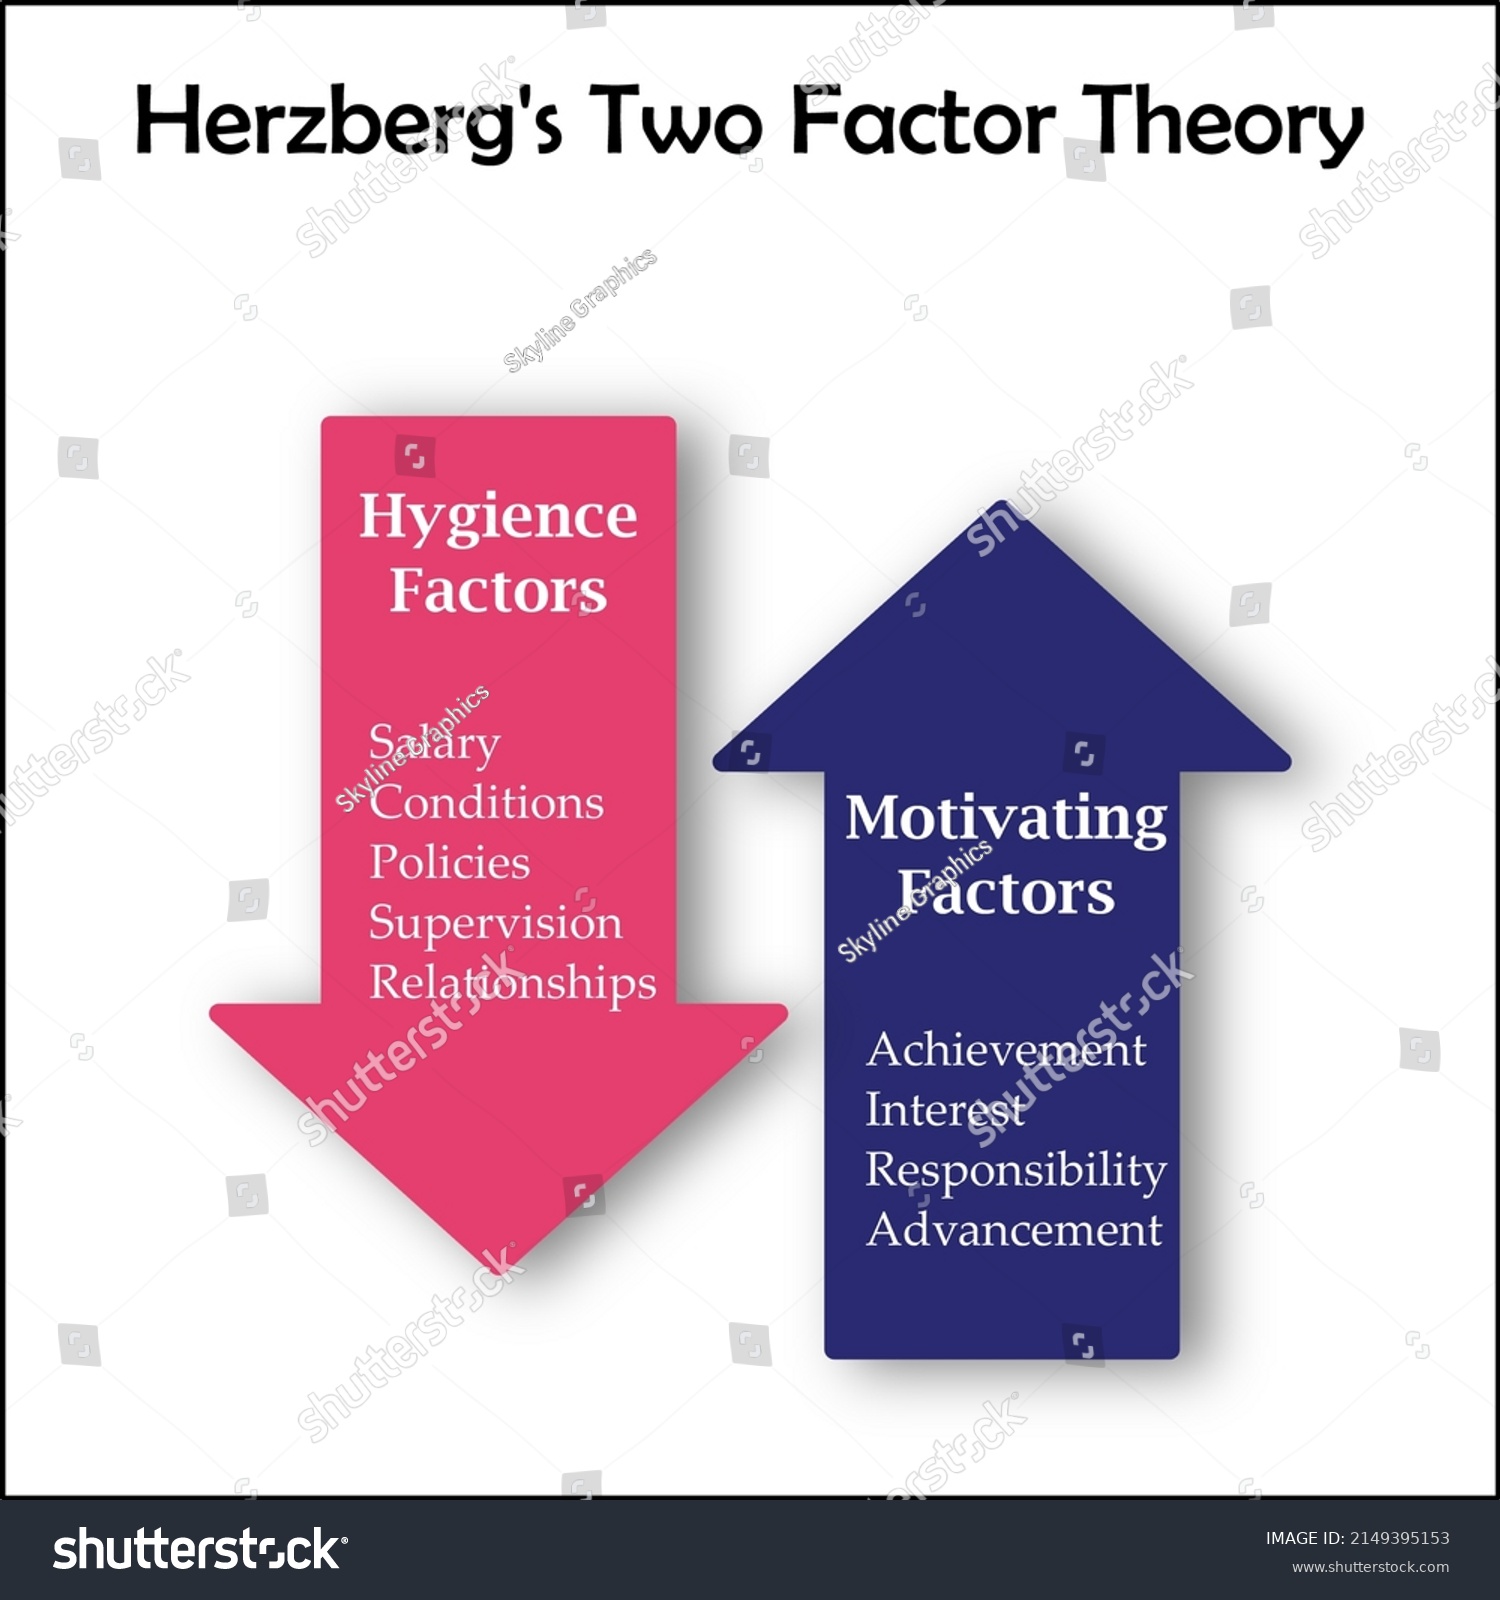 Herzbergs Two Factor Theory Arrow Infographic Stock Vector Royalty Free 2149395153 Shutterstock 7198